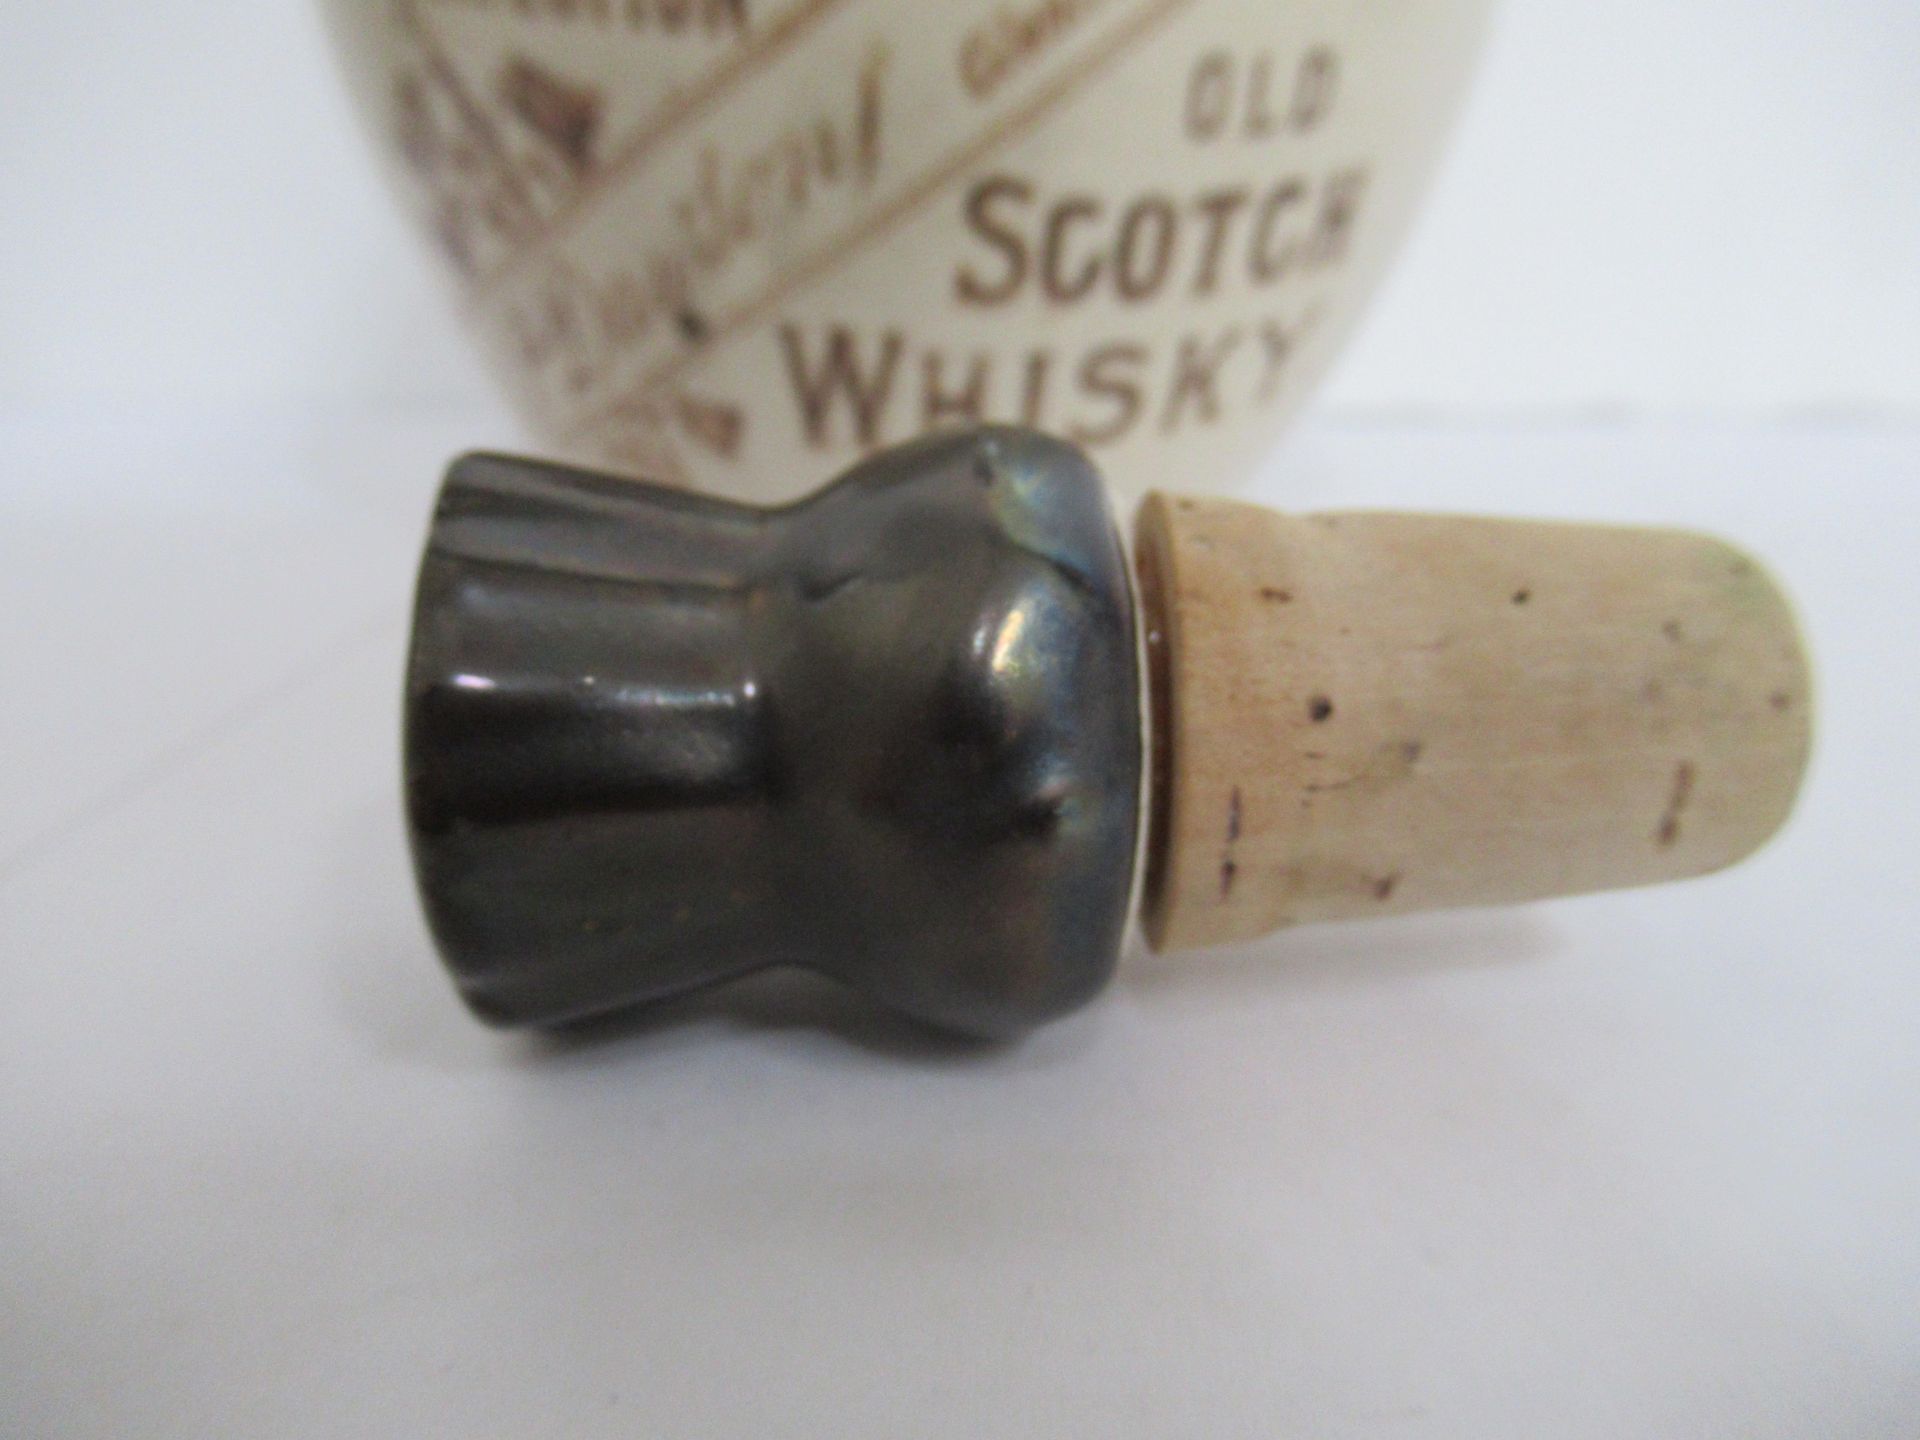 Dawson's Perfection old scotch whisky Dufftown Glenlivet distract jug with stopper - Image 6 of 8